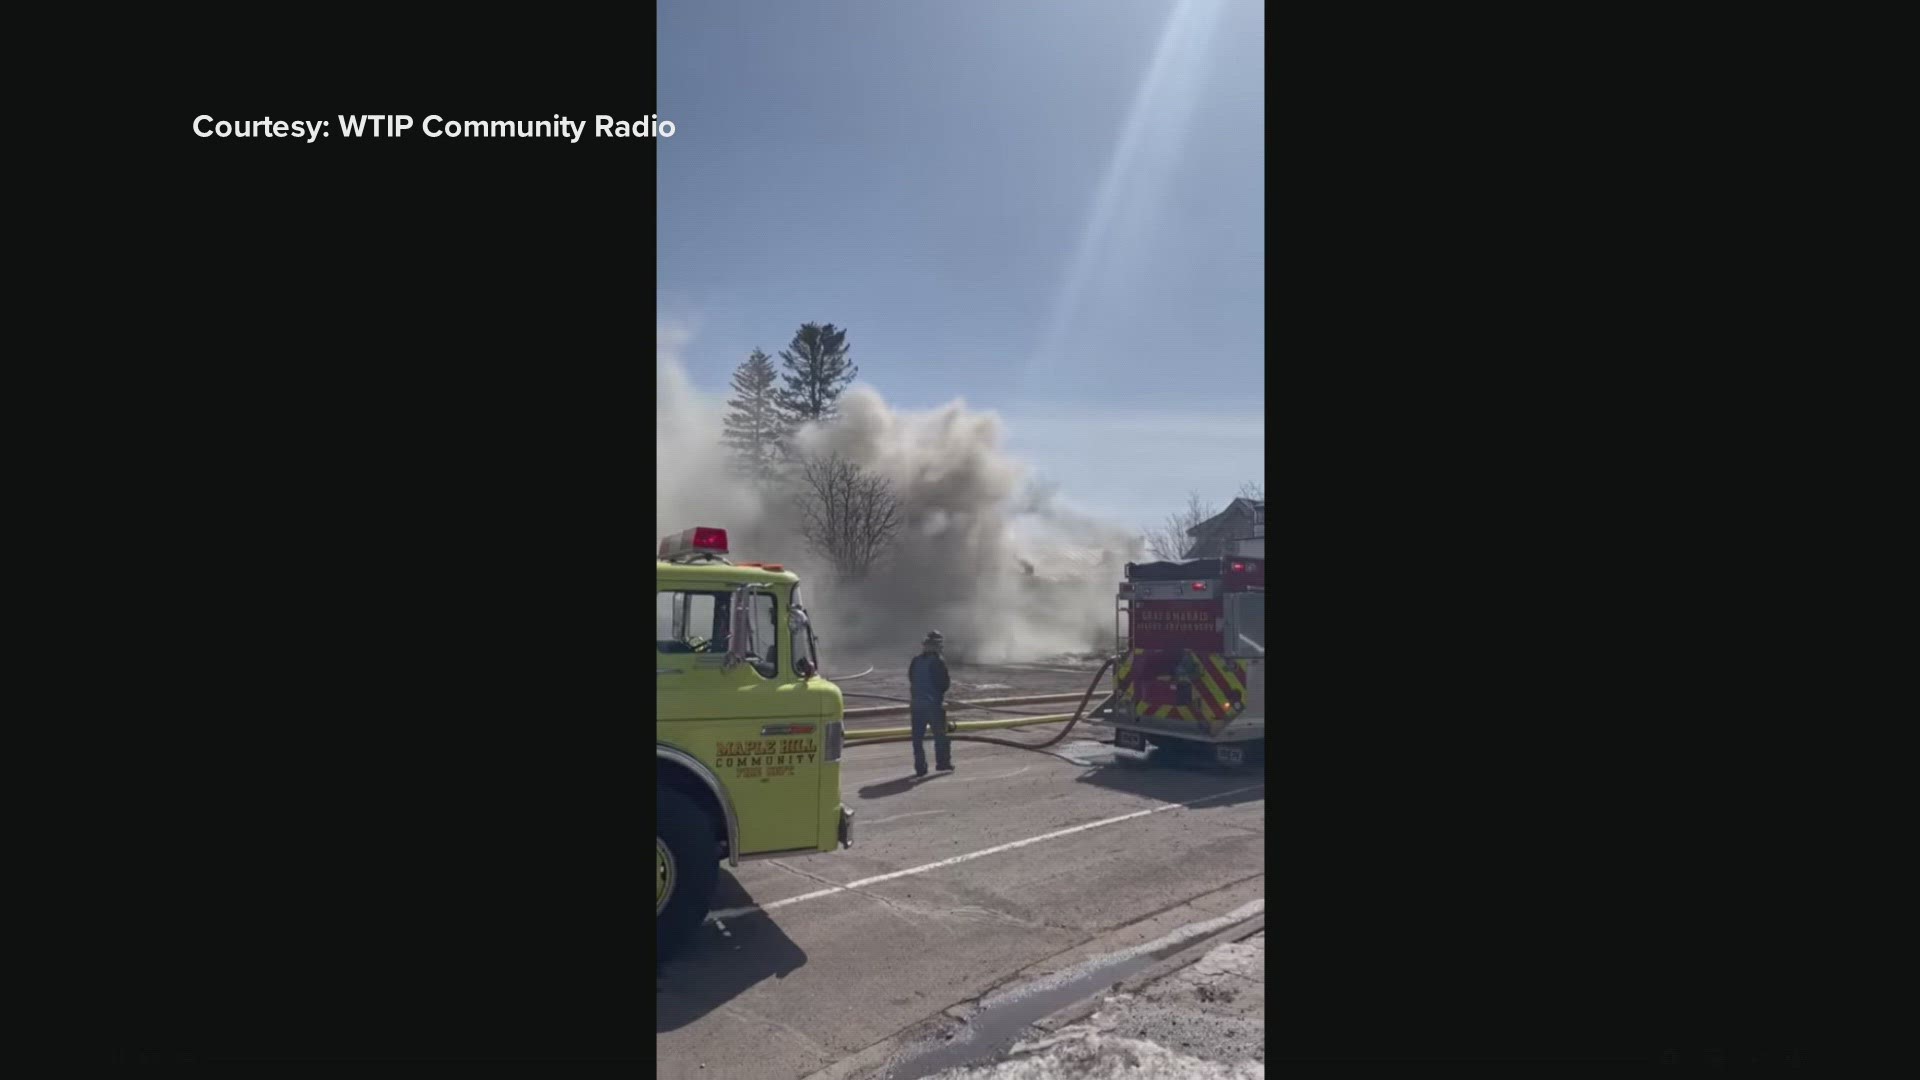 Crews were dispatched to Sydney's Frozen Custard and Wood-Fired Pizza in Grand Marais shortly after 11 a.m. Monday, on reports smoke was pouring from the building.